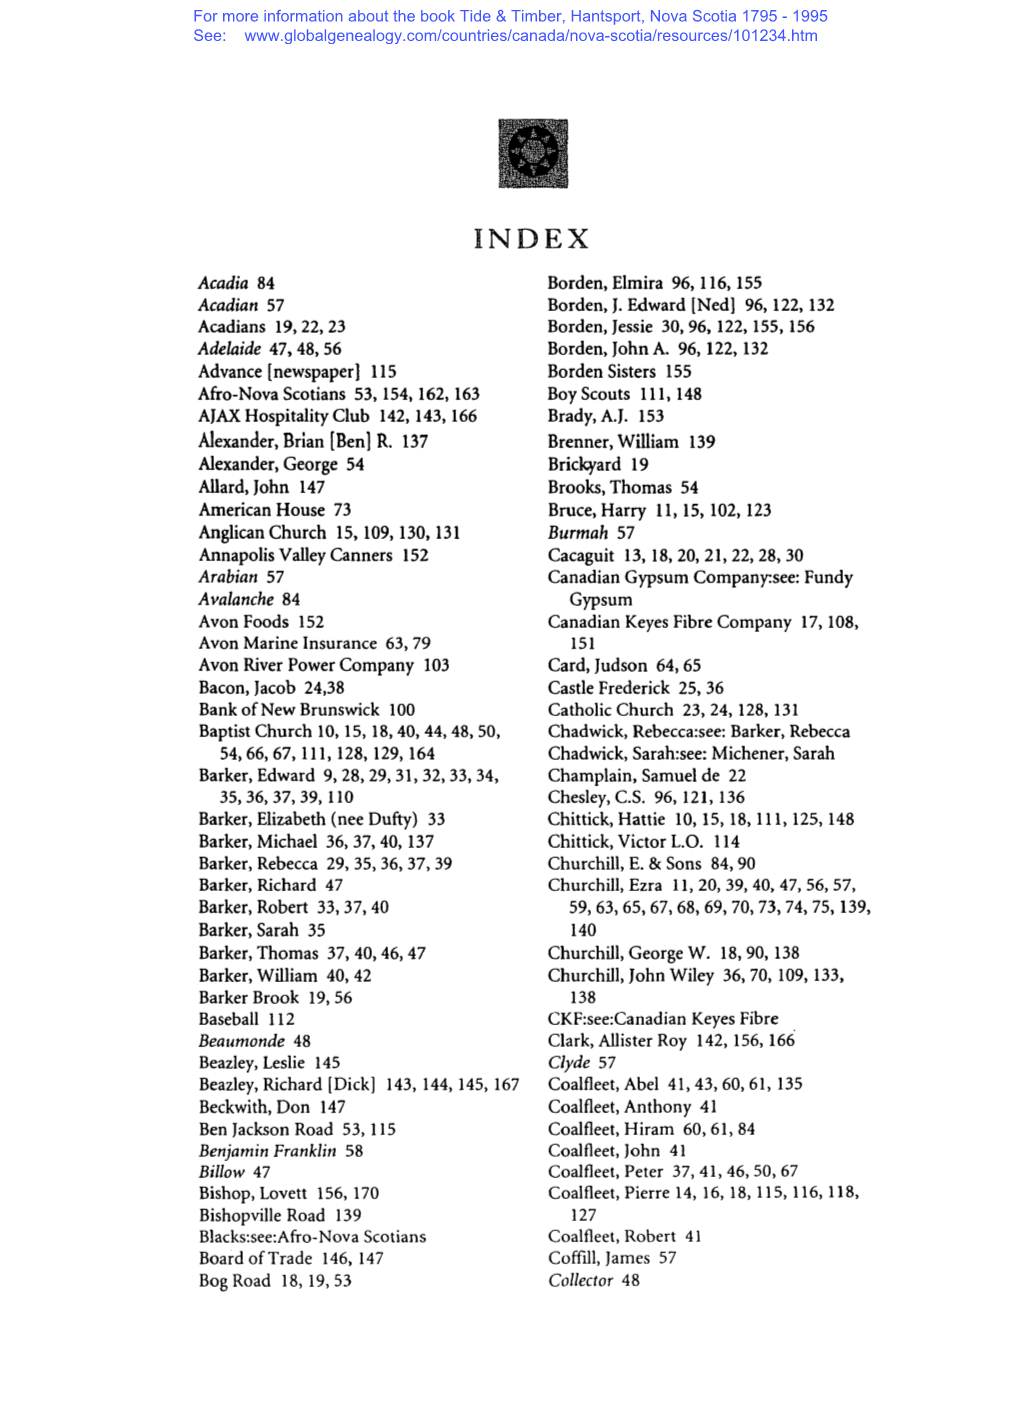 To Browse the Index